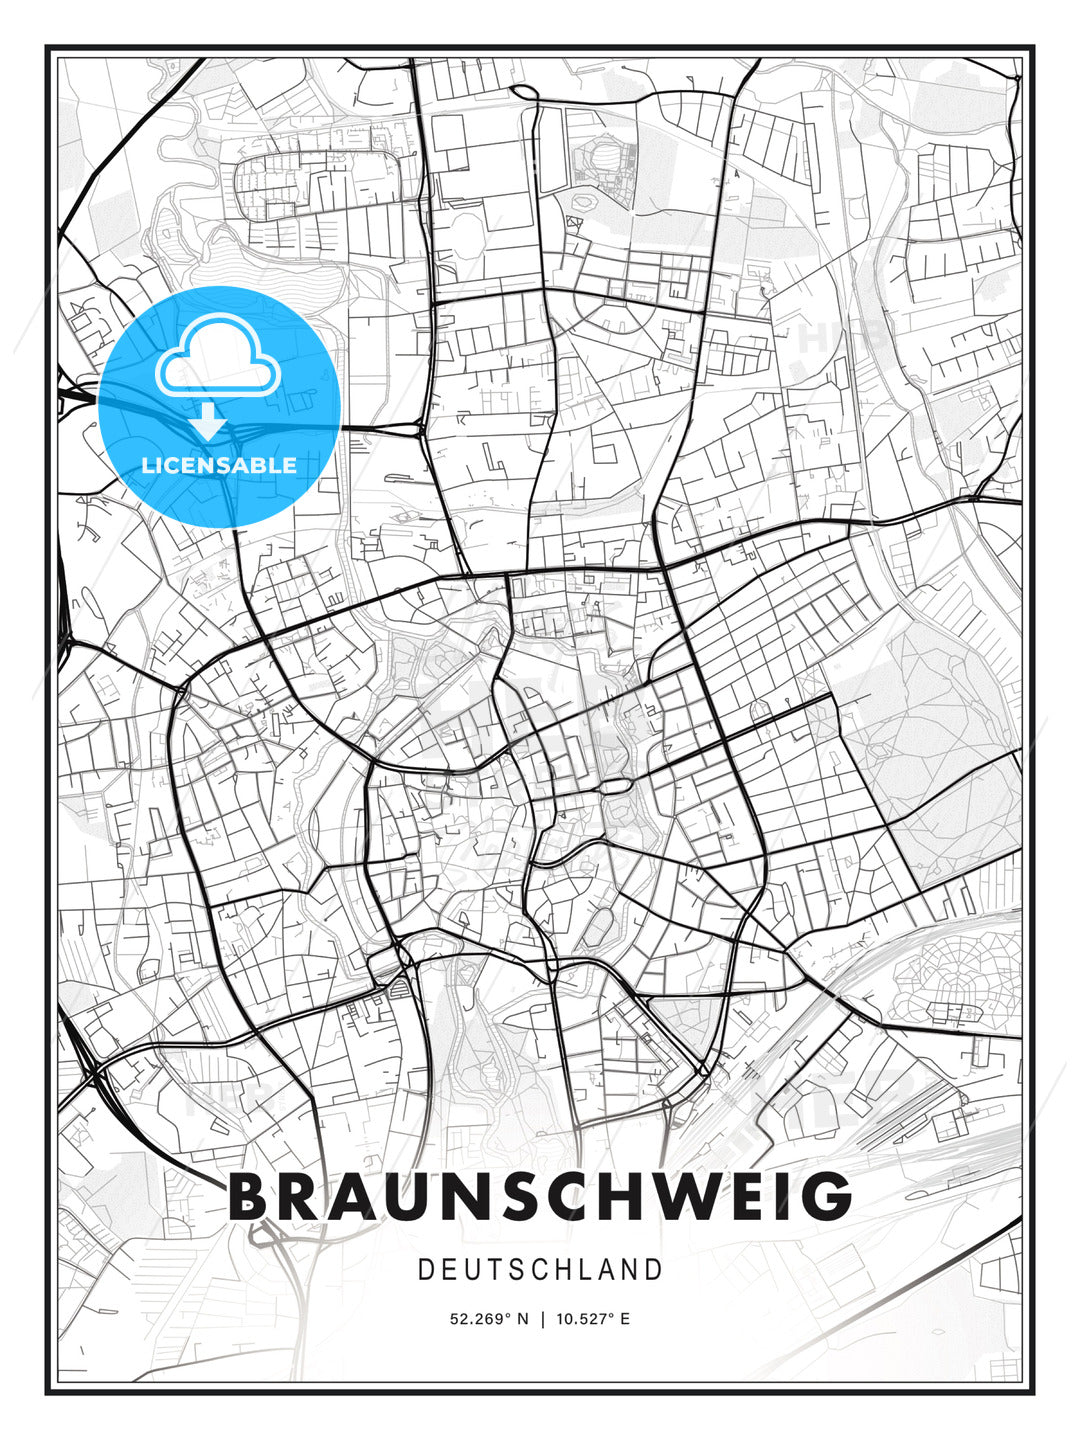 Braunschweig, Germany, Modern Print Template in Various Formats - HEBSTREITS Sketches